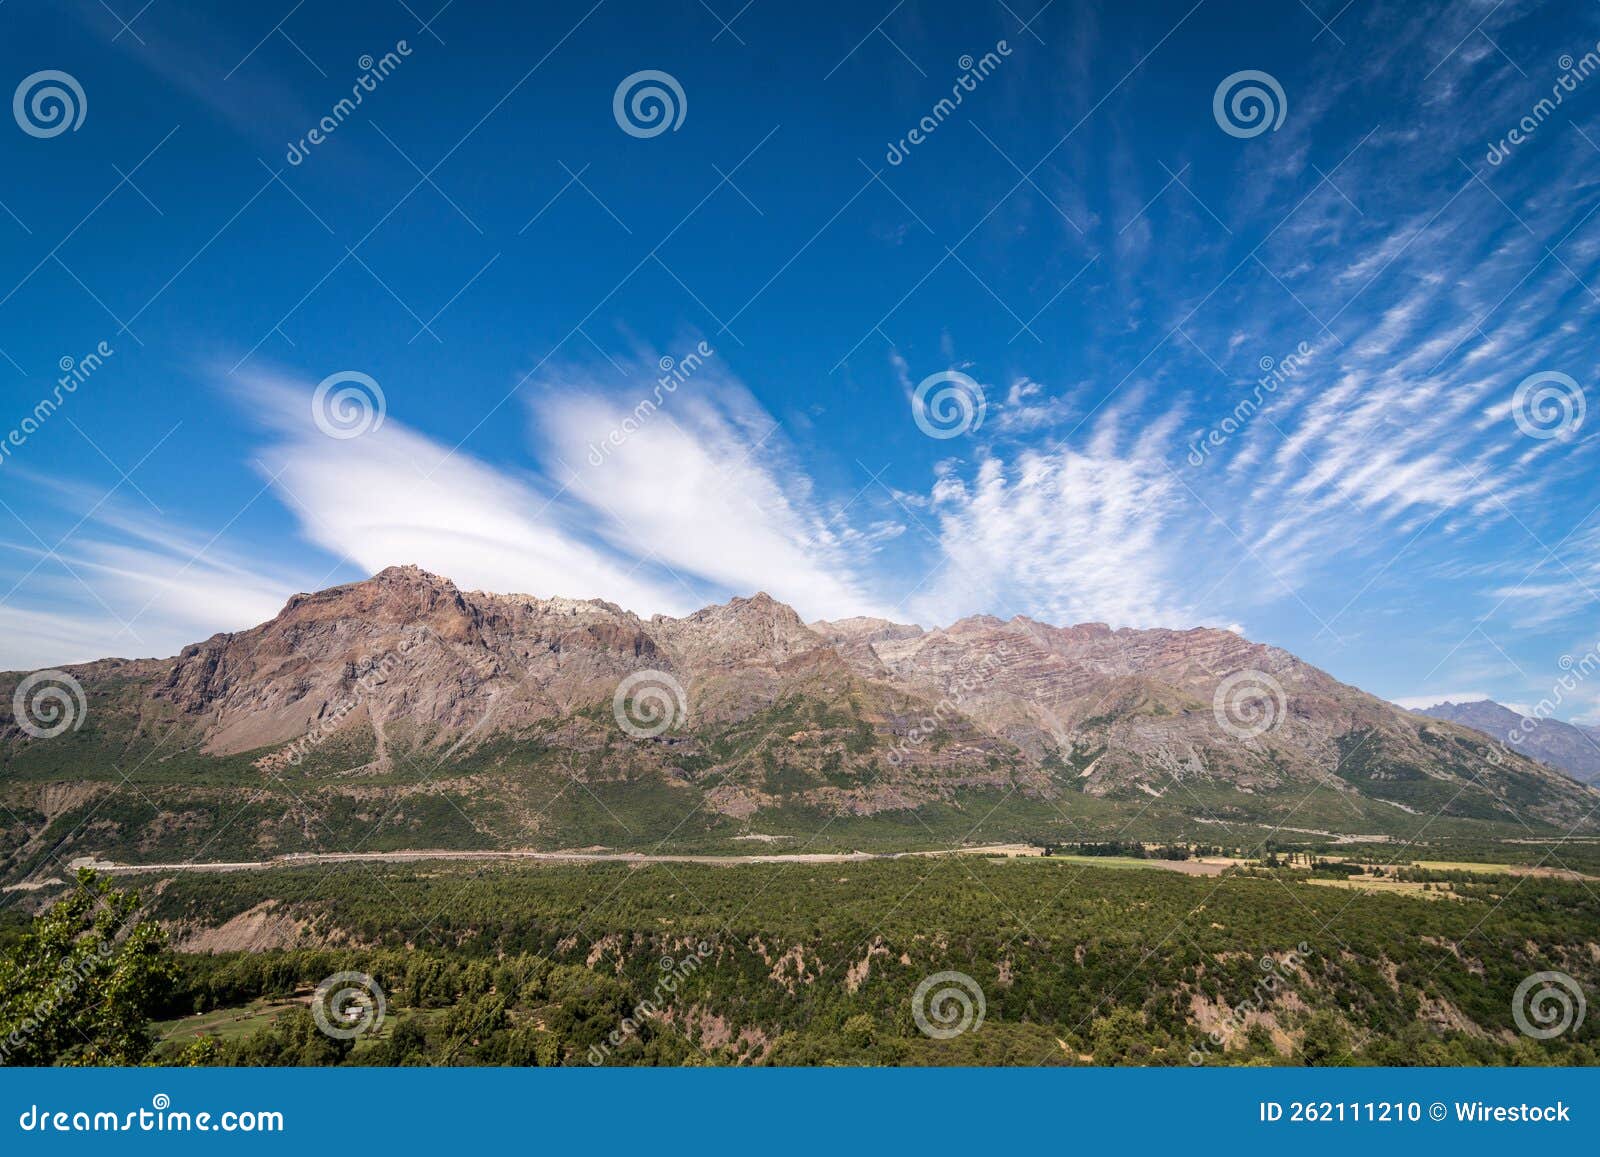 beautiful shot of greenery-covered hills and mountains in rio los cipreses national reserve in chile